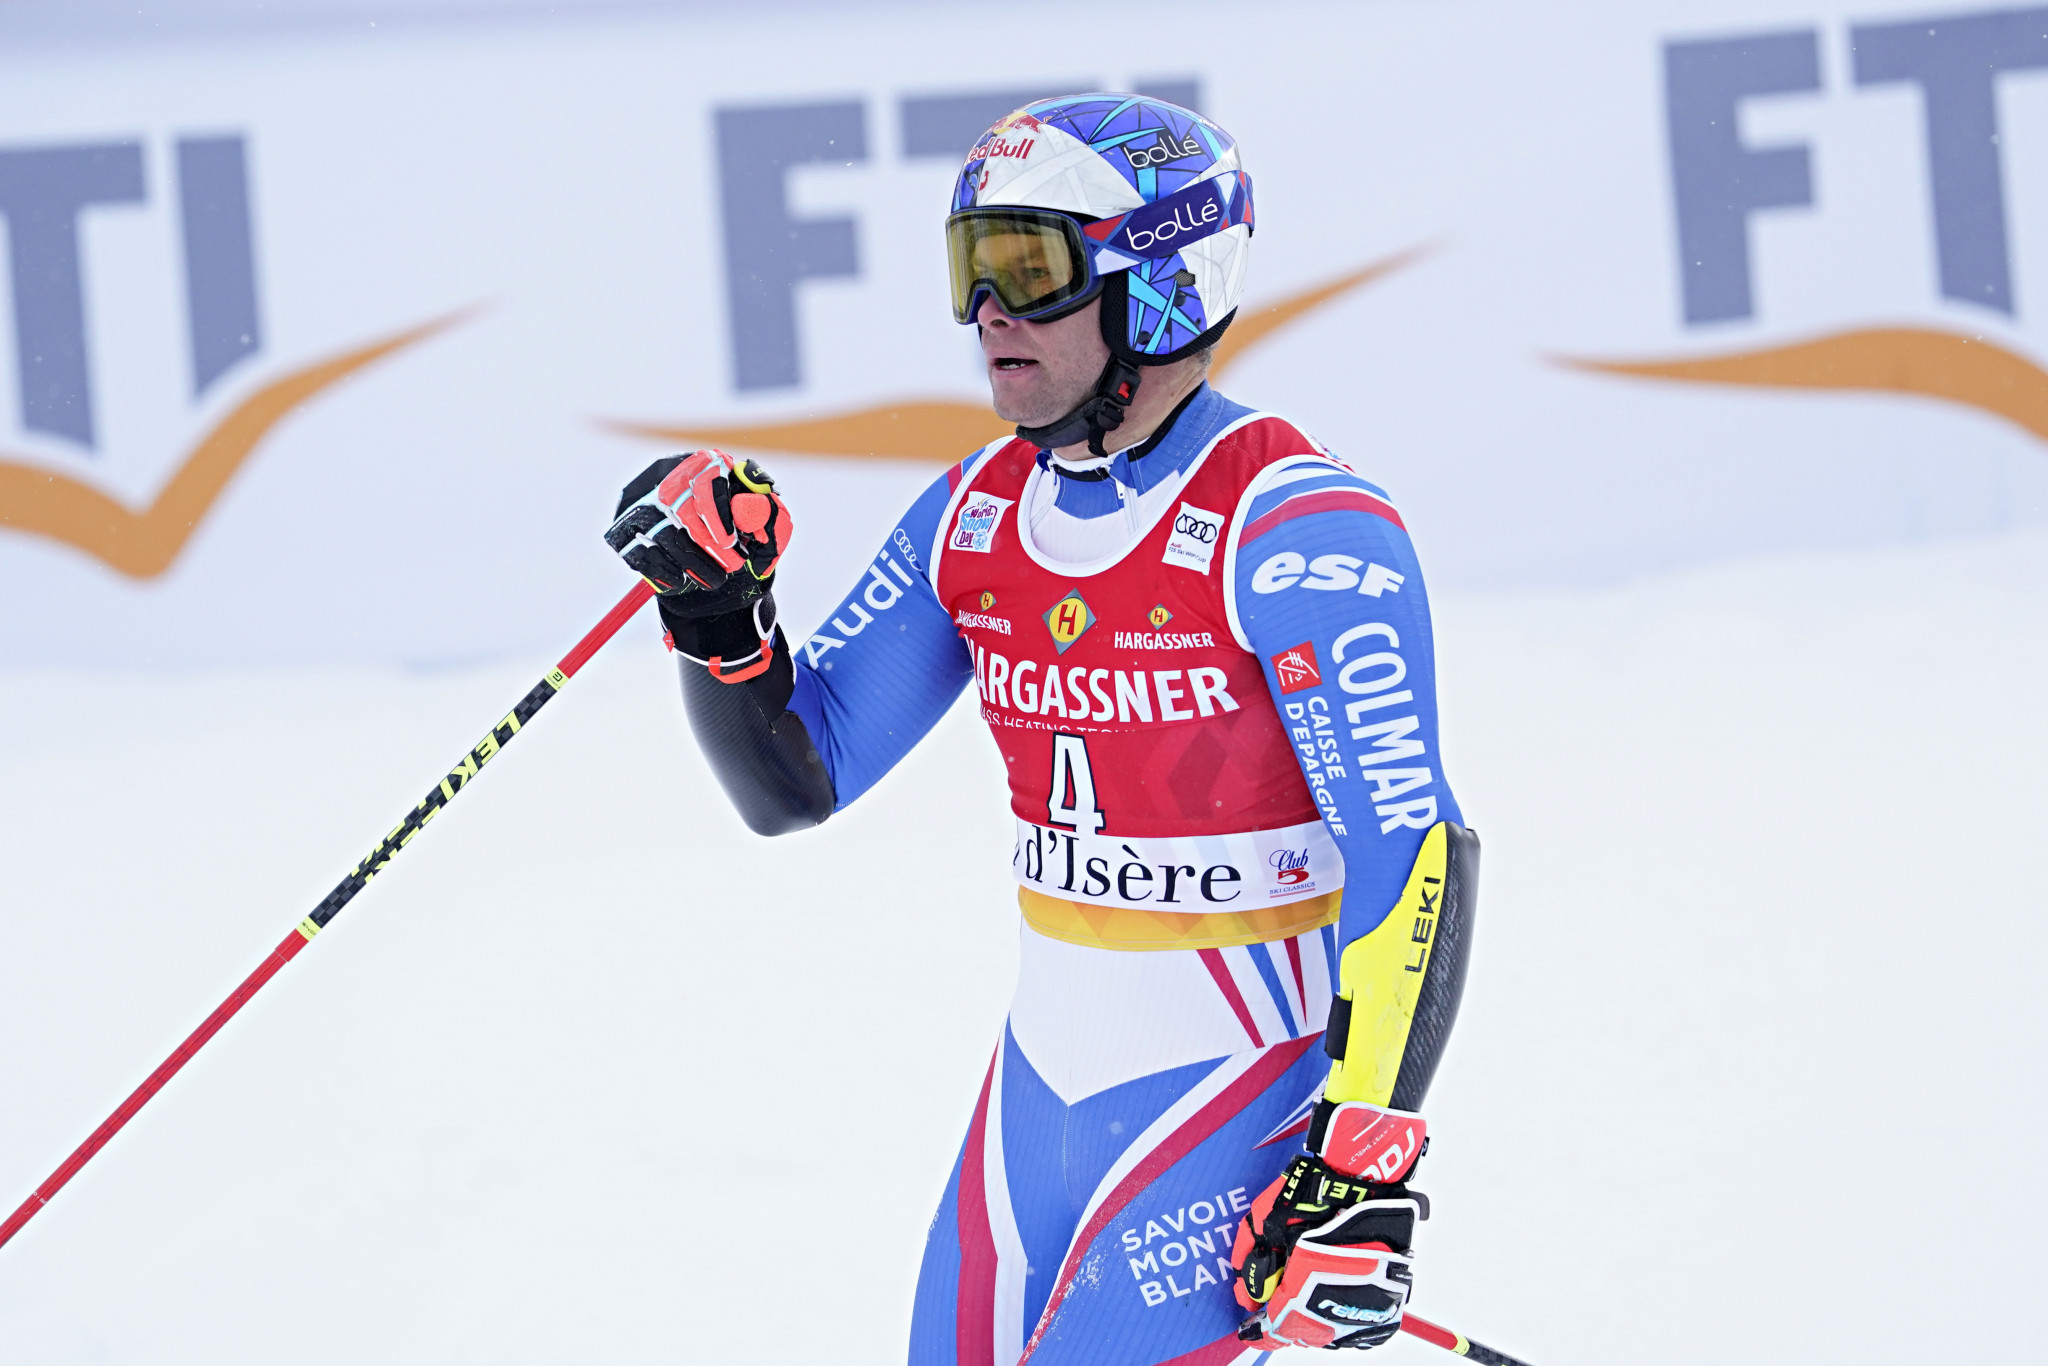 Alexis Pinturault of France finished second on home ice in Val d’Isère ©Getty Images